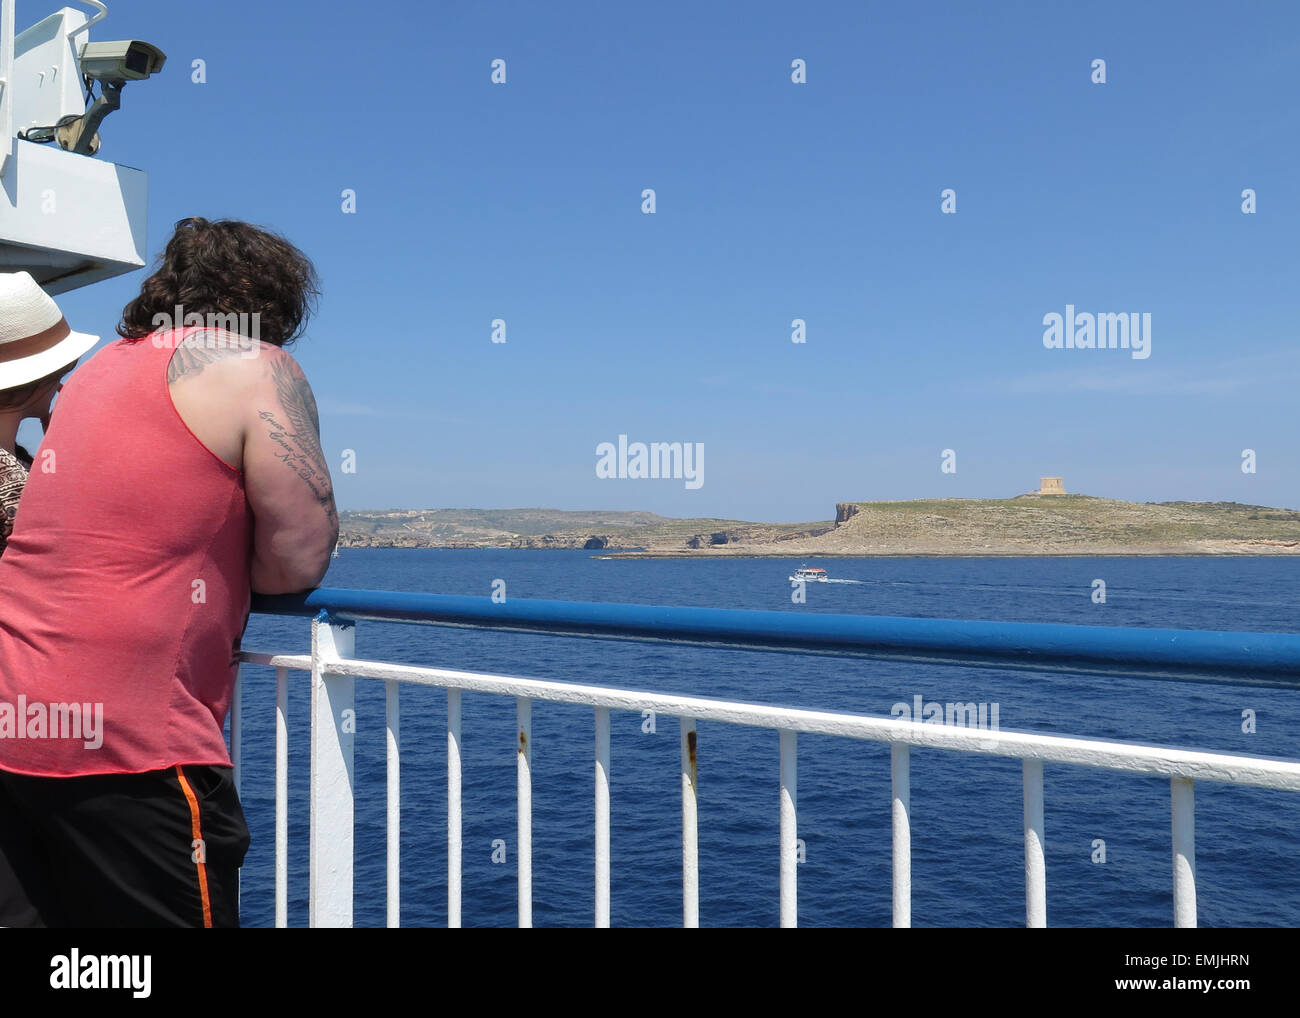 Fat bloke with tattoos leaning on the rails of a boat Stock Photo